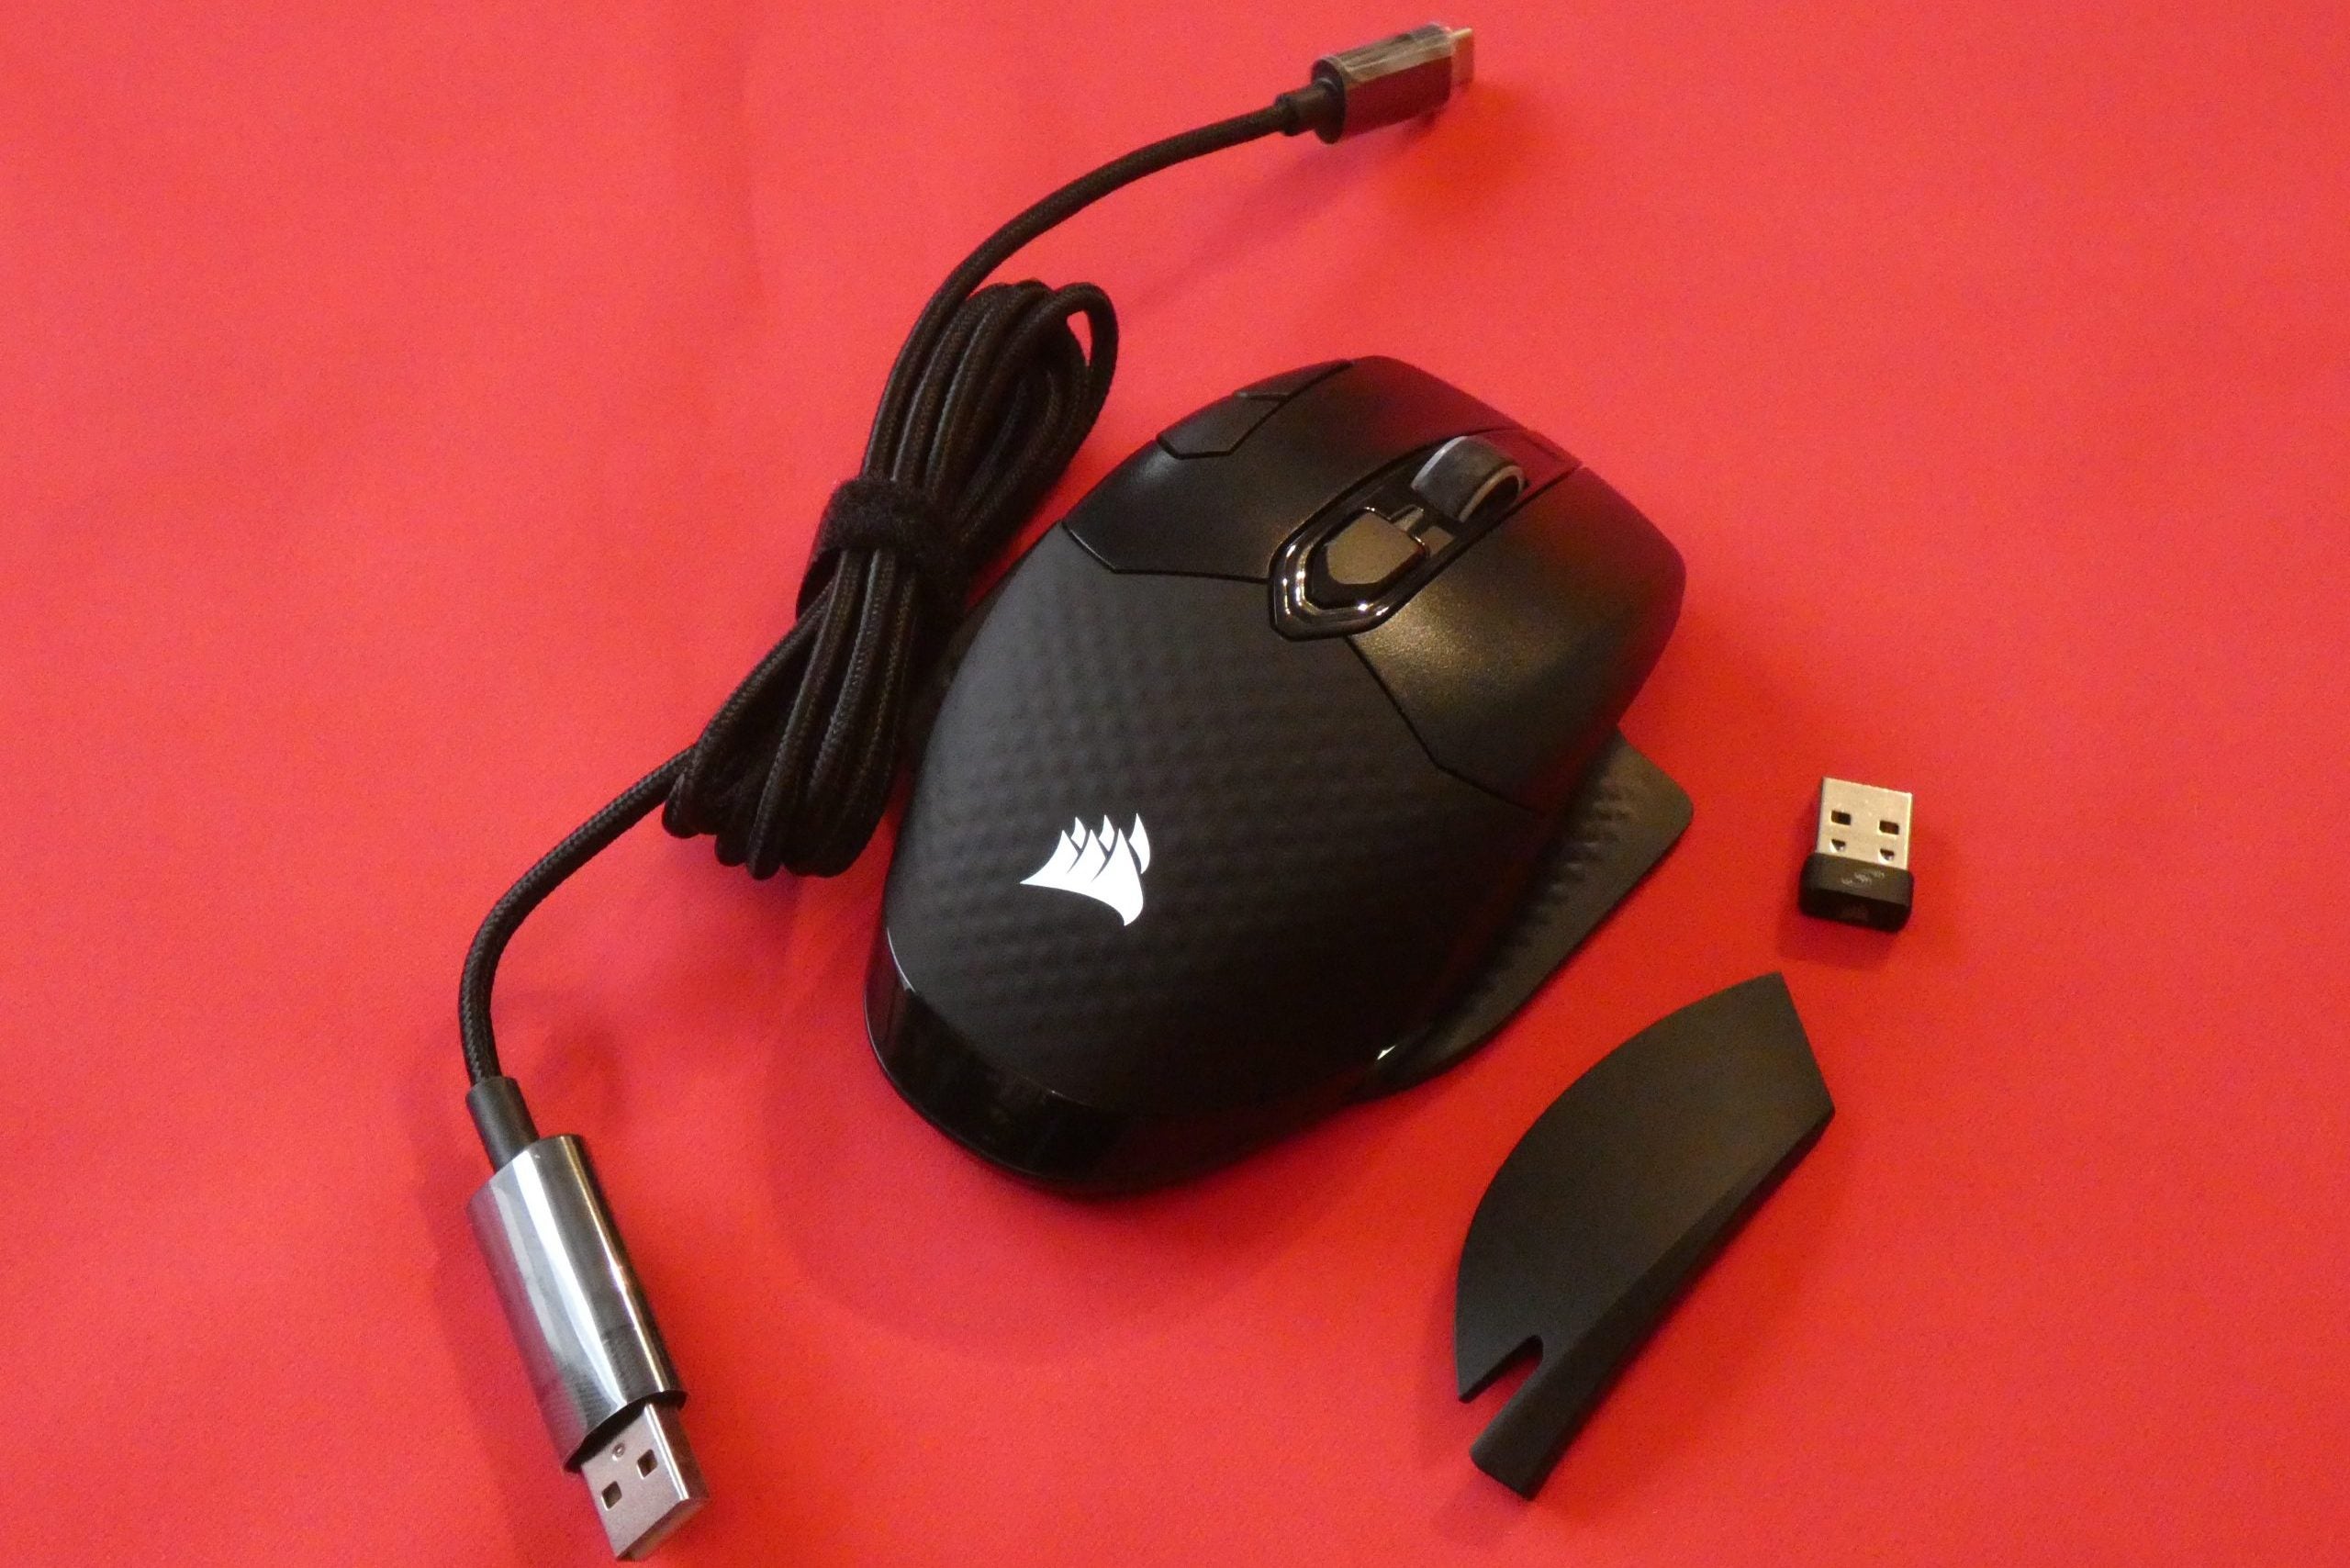 Corsair Dark Core RGB Pro SEA black Core Pro SE mouse kept on a red background with it's adapter and cables